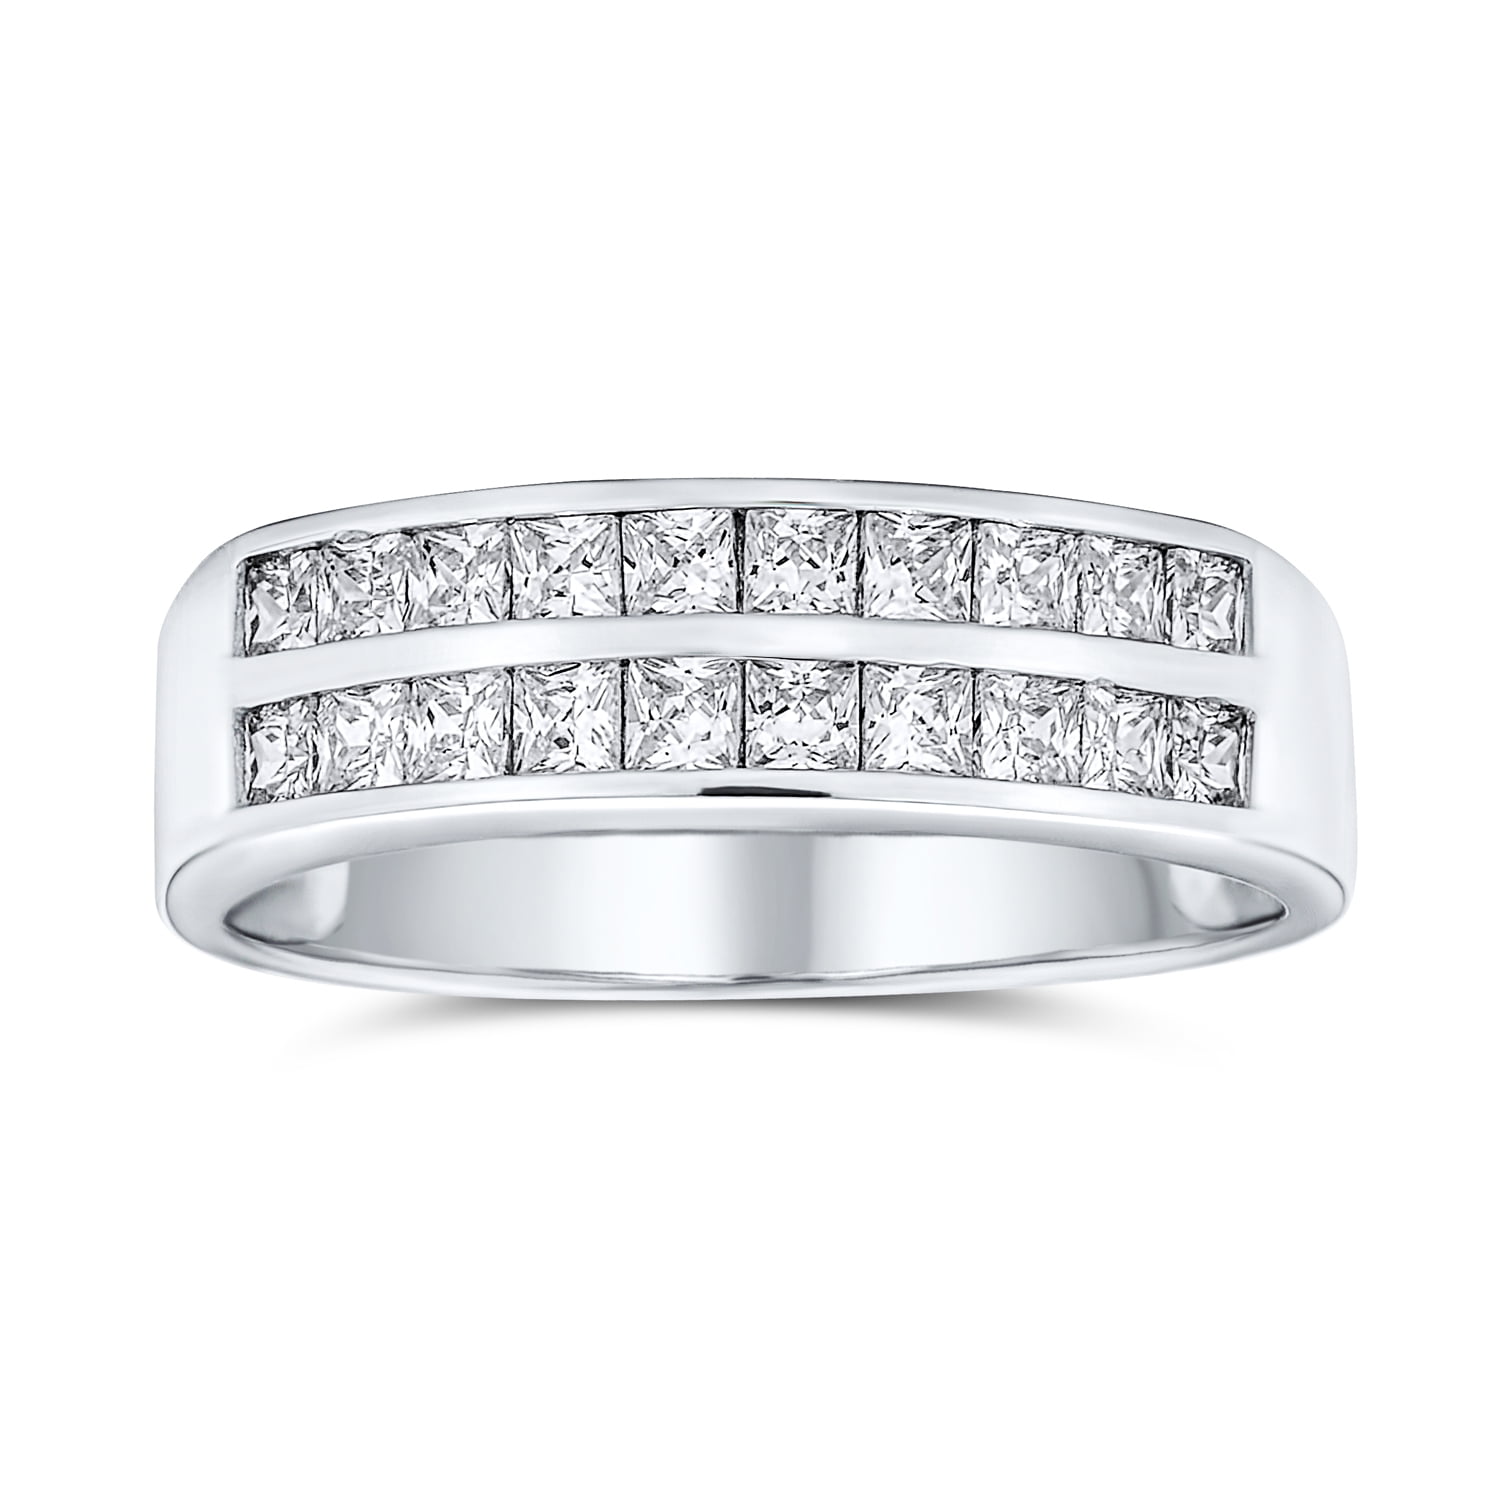 Melody CZ /& Sterling Silver Channel Set Wedding Band